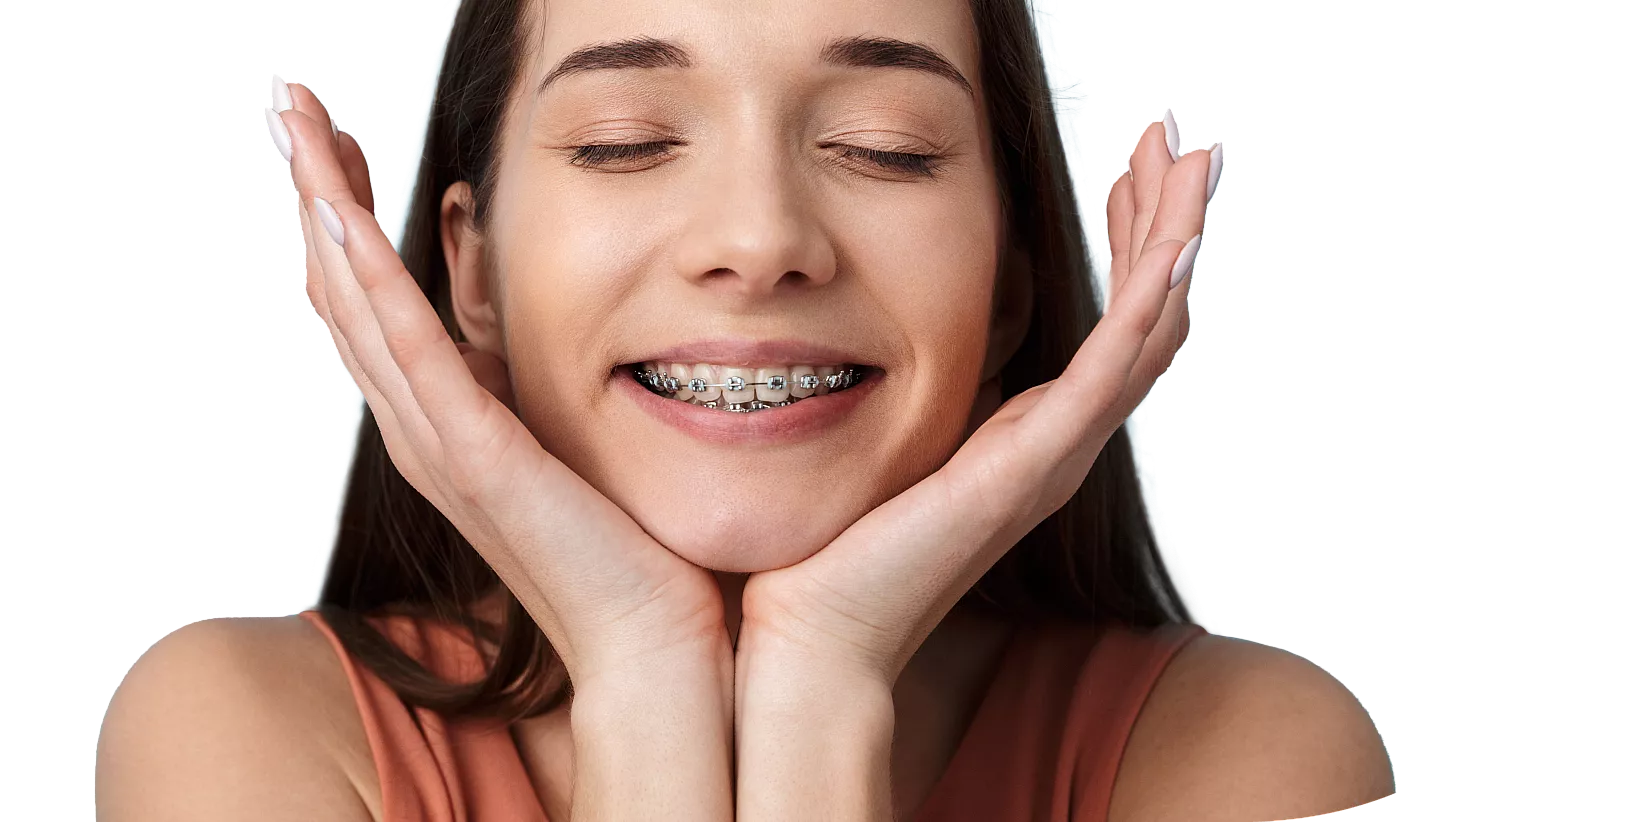 Orthodontic services in Victoria